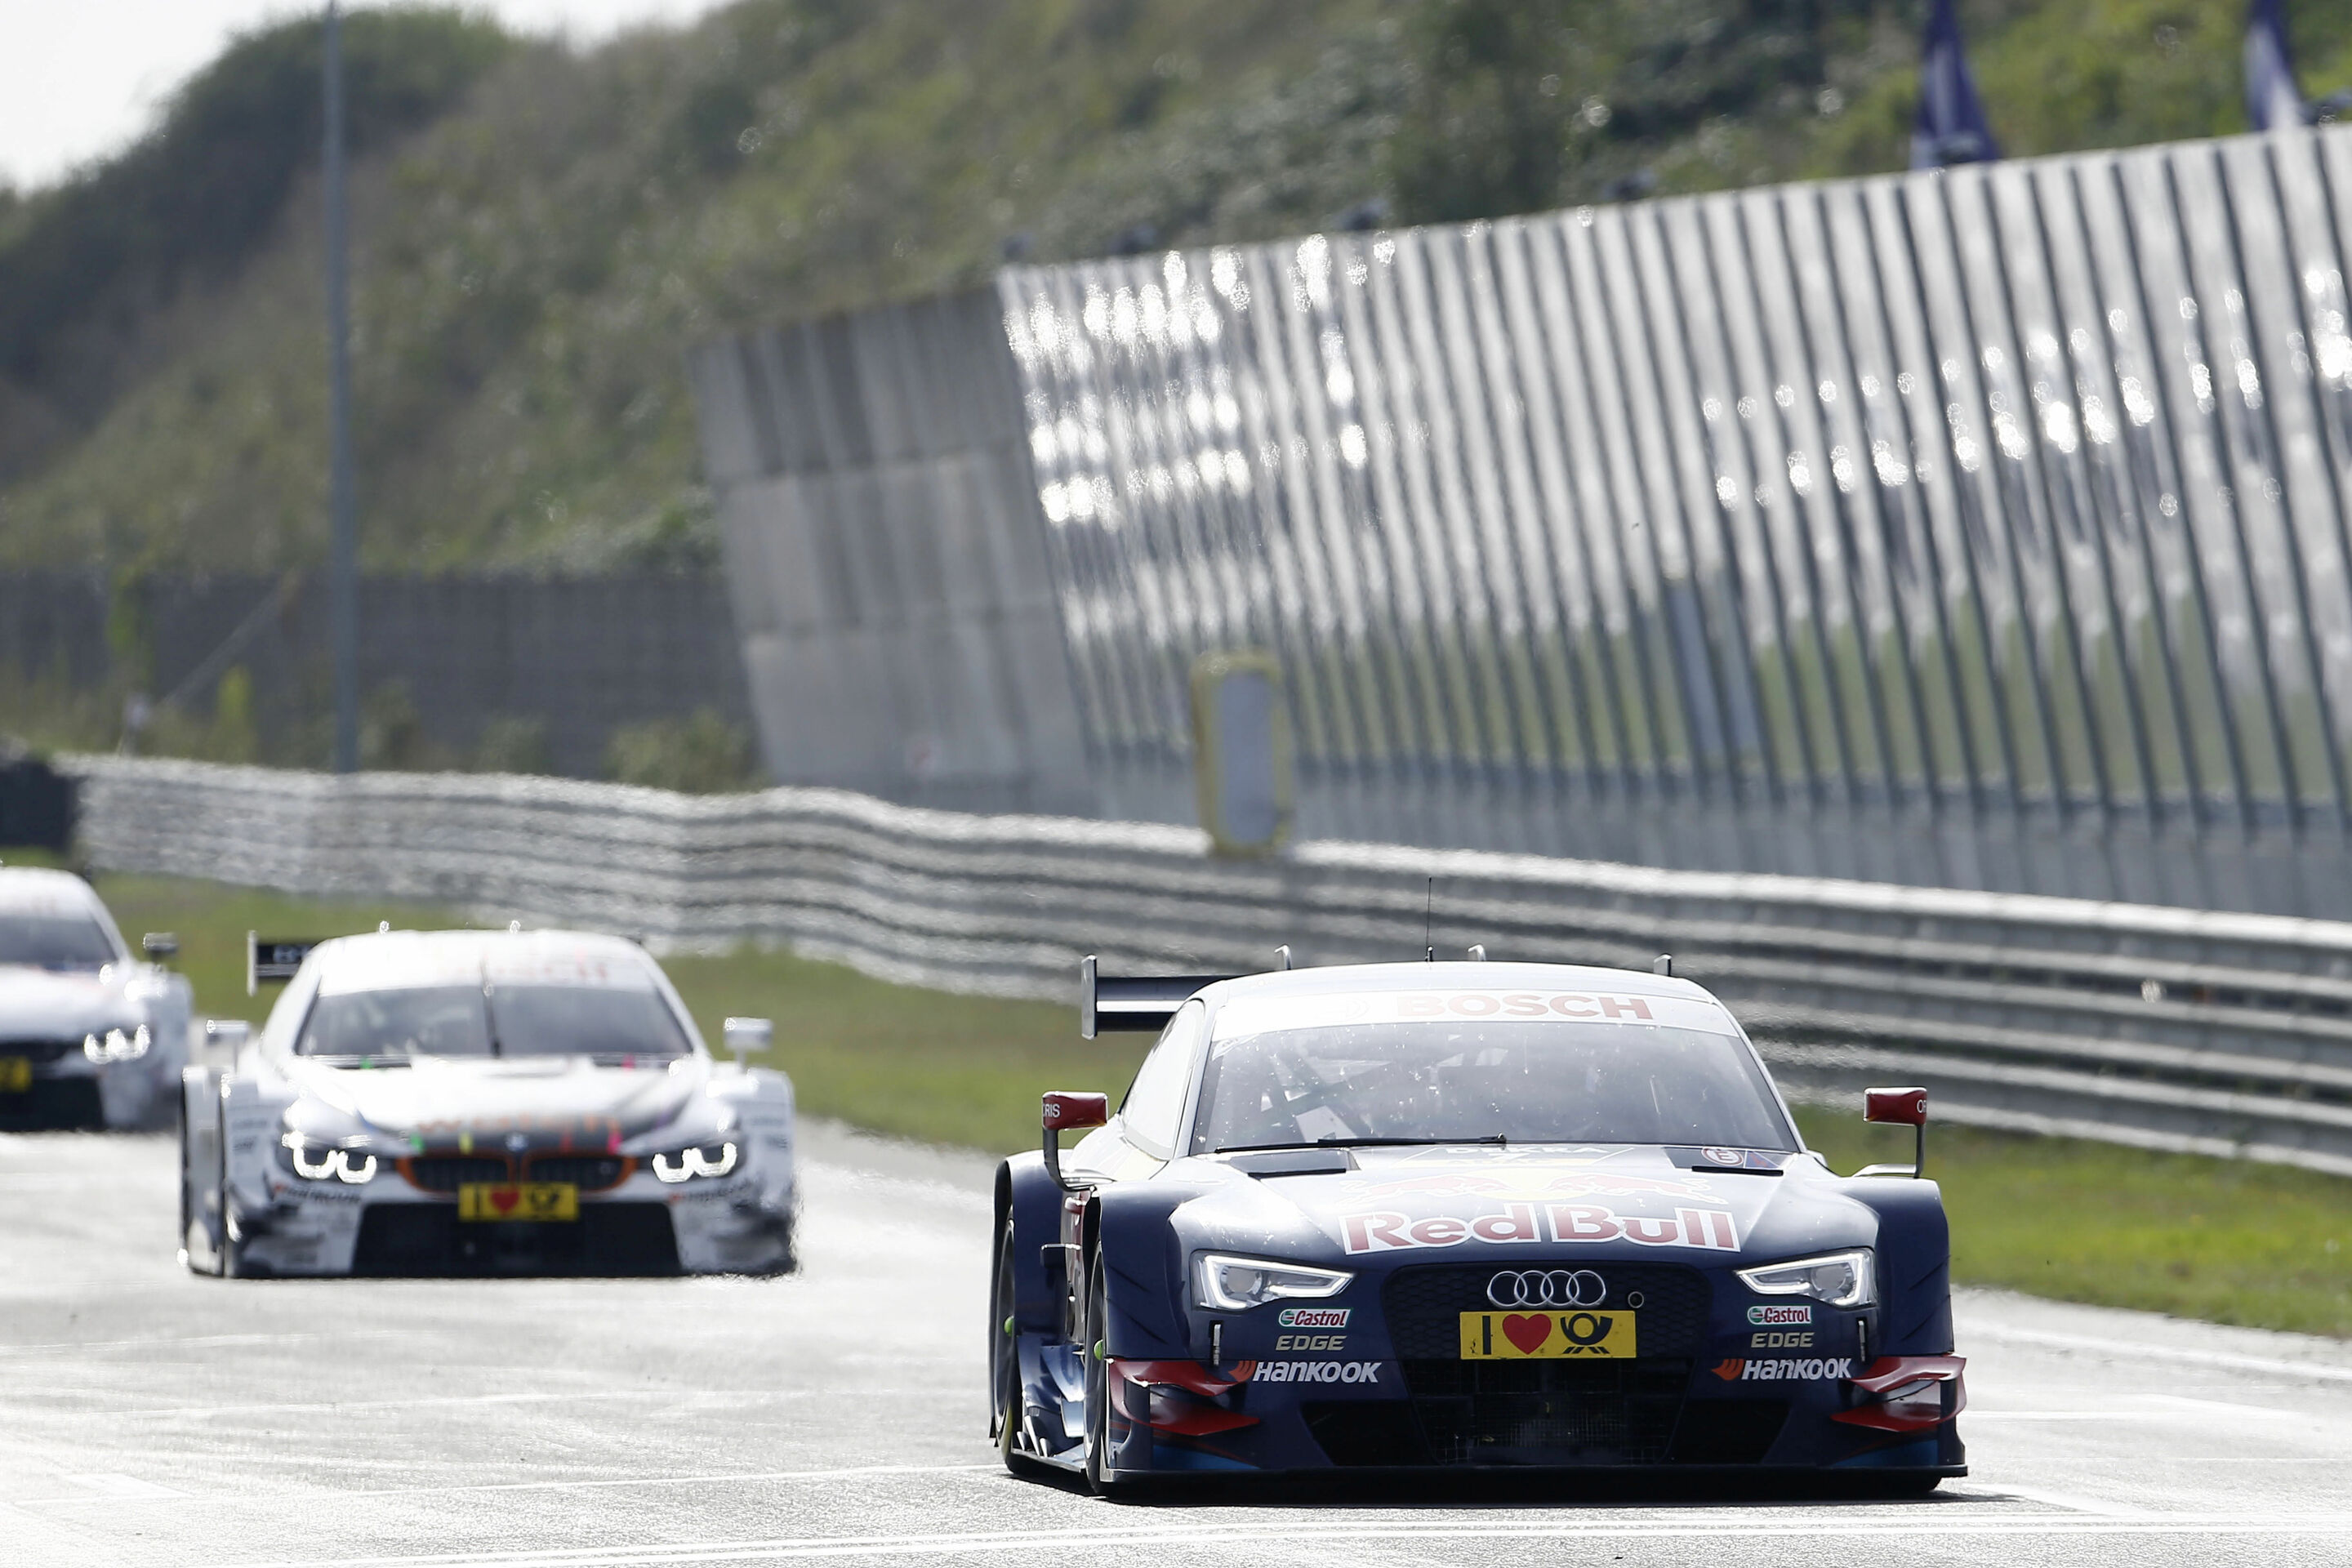 Quotes after the race at Zandvoort